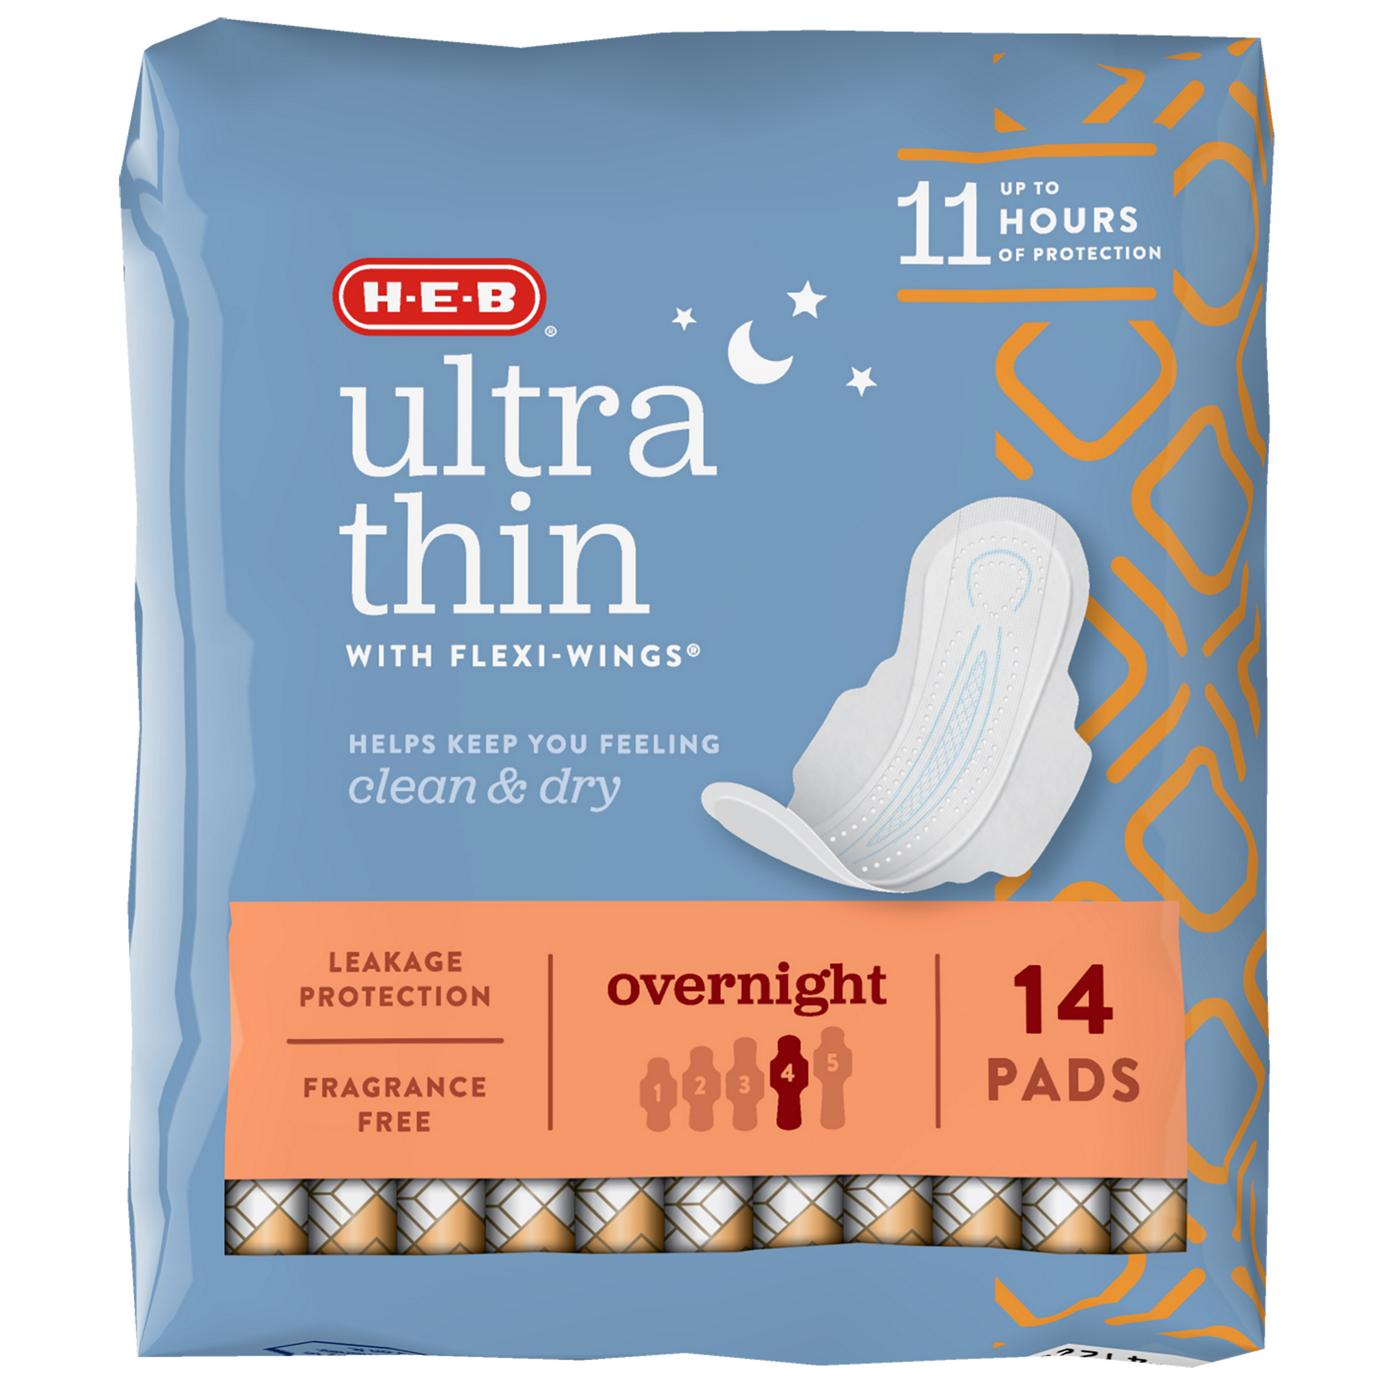 H-E-B Ultra Thin with Flexi-Wings Overnight Pads; image 3 of 3